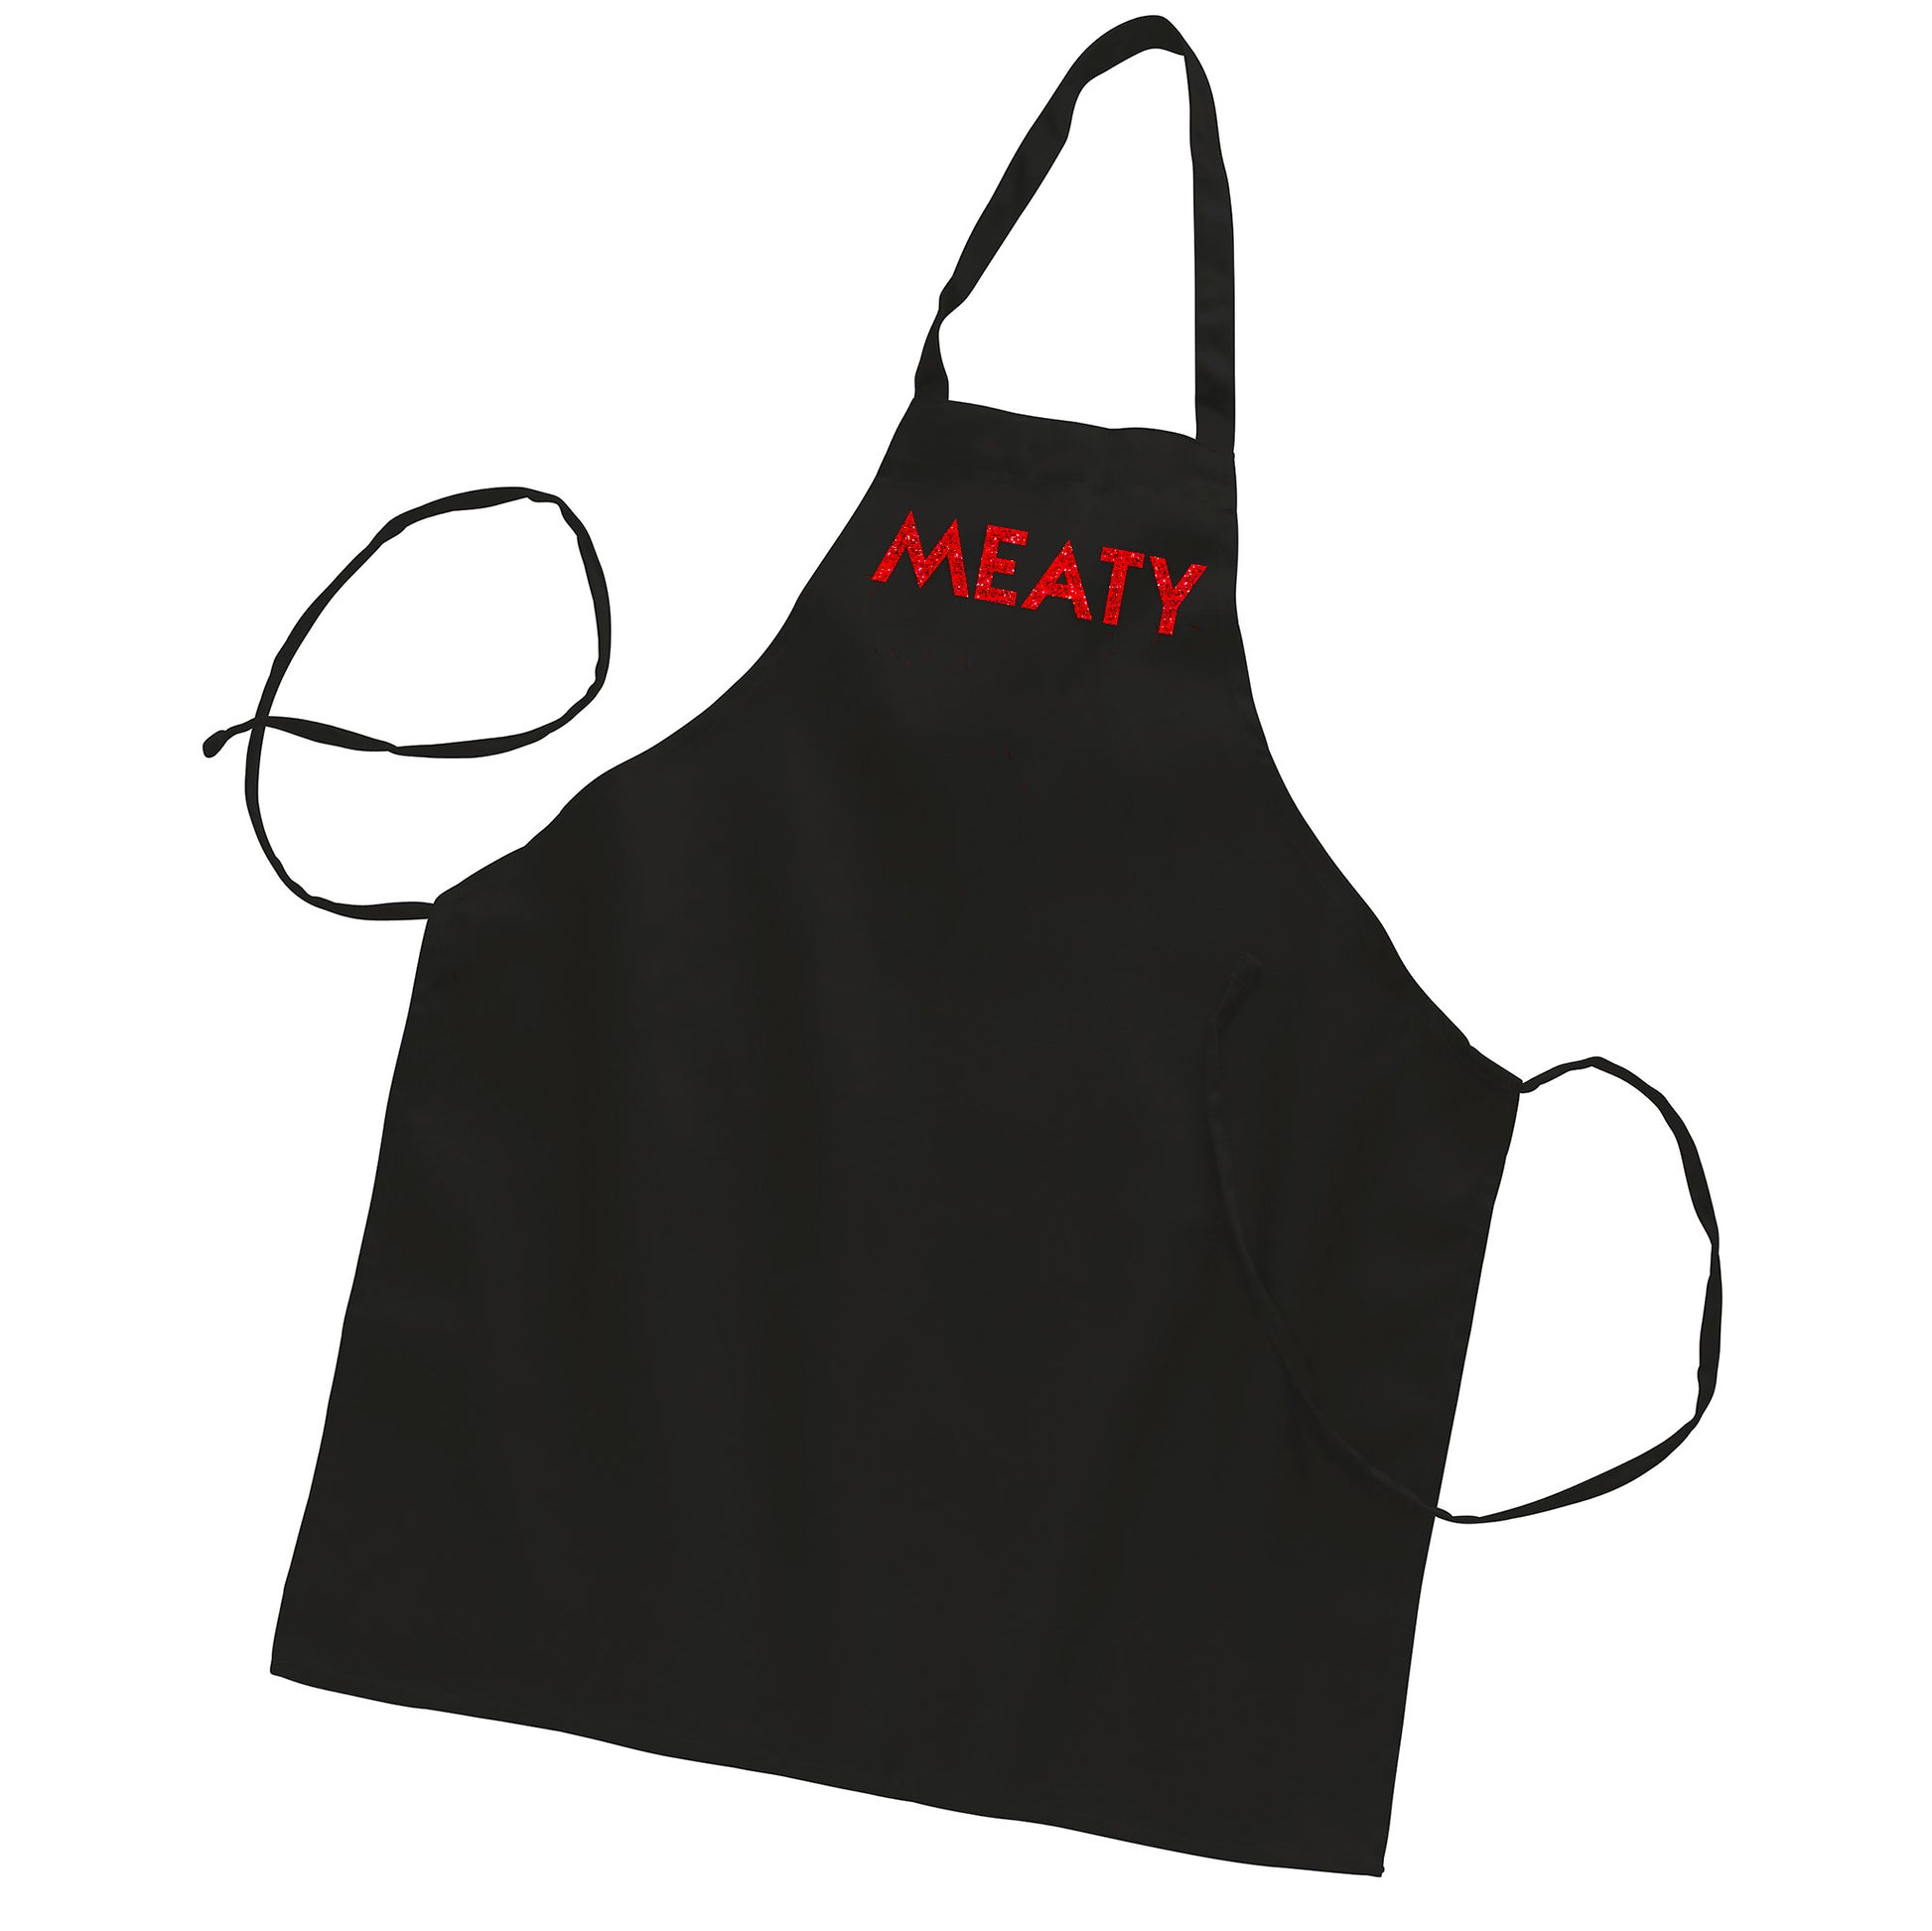 Black butcher-style apron with custom text "Meaty" in red glitter geometric text